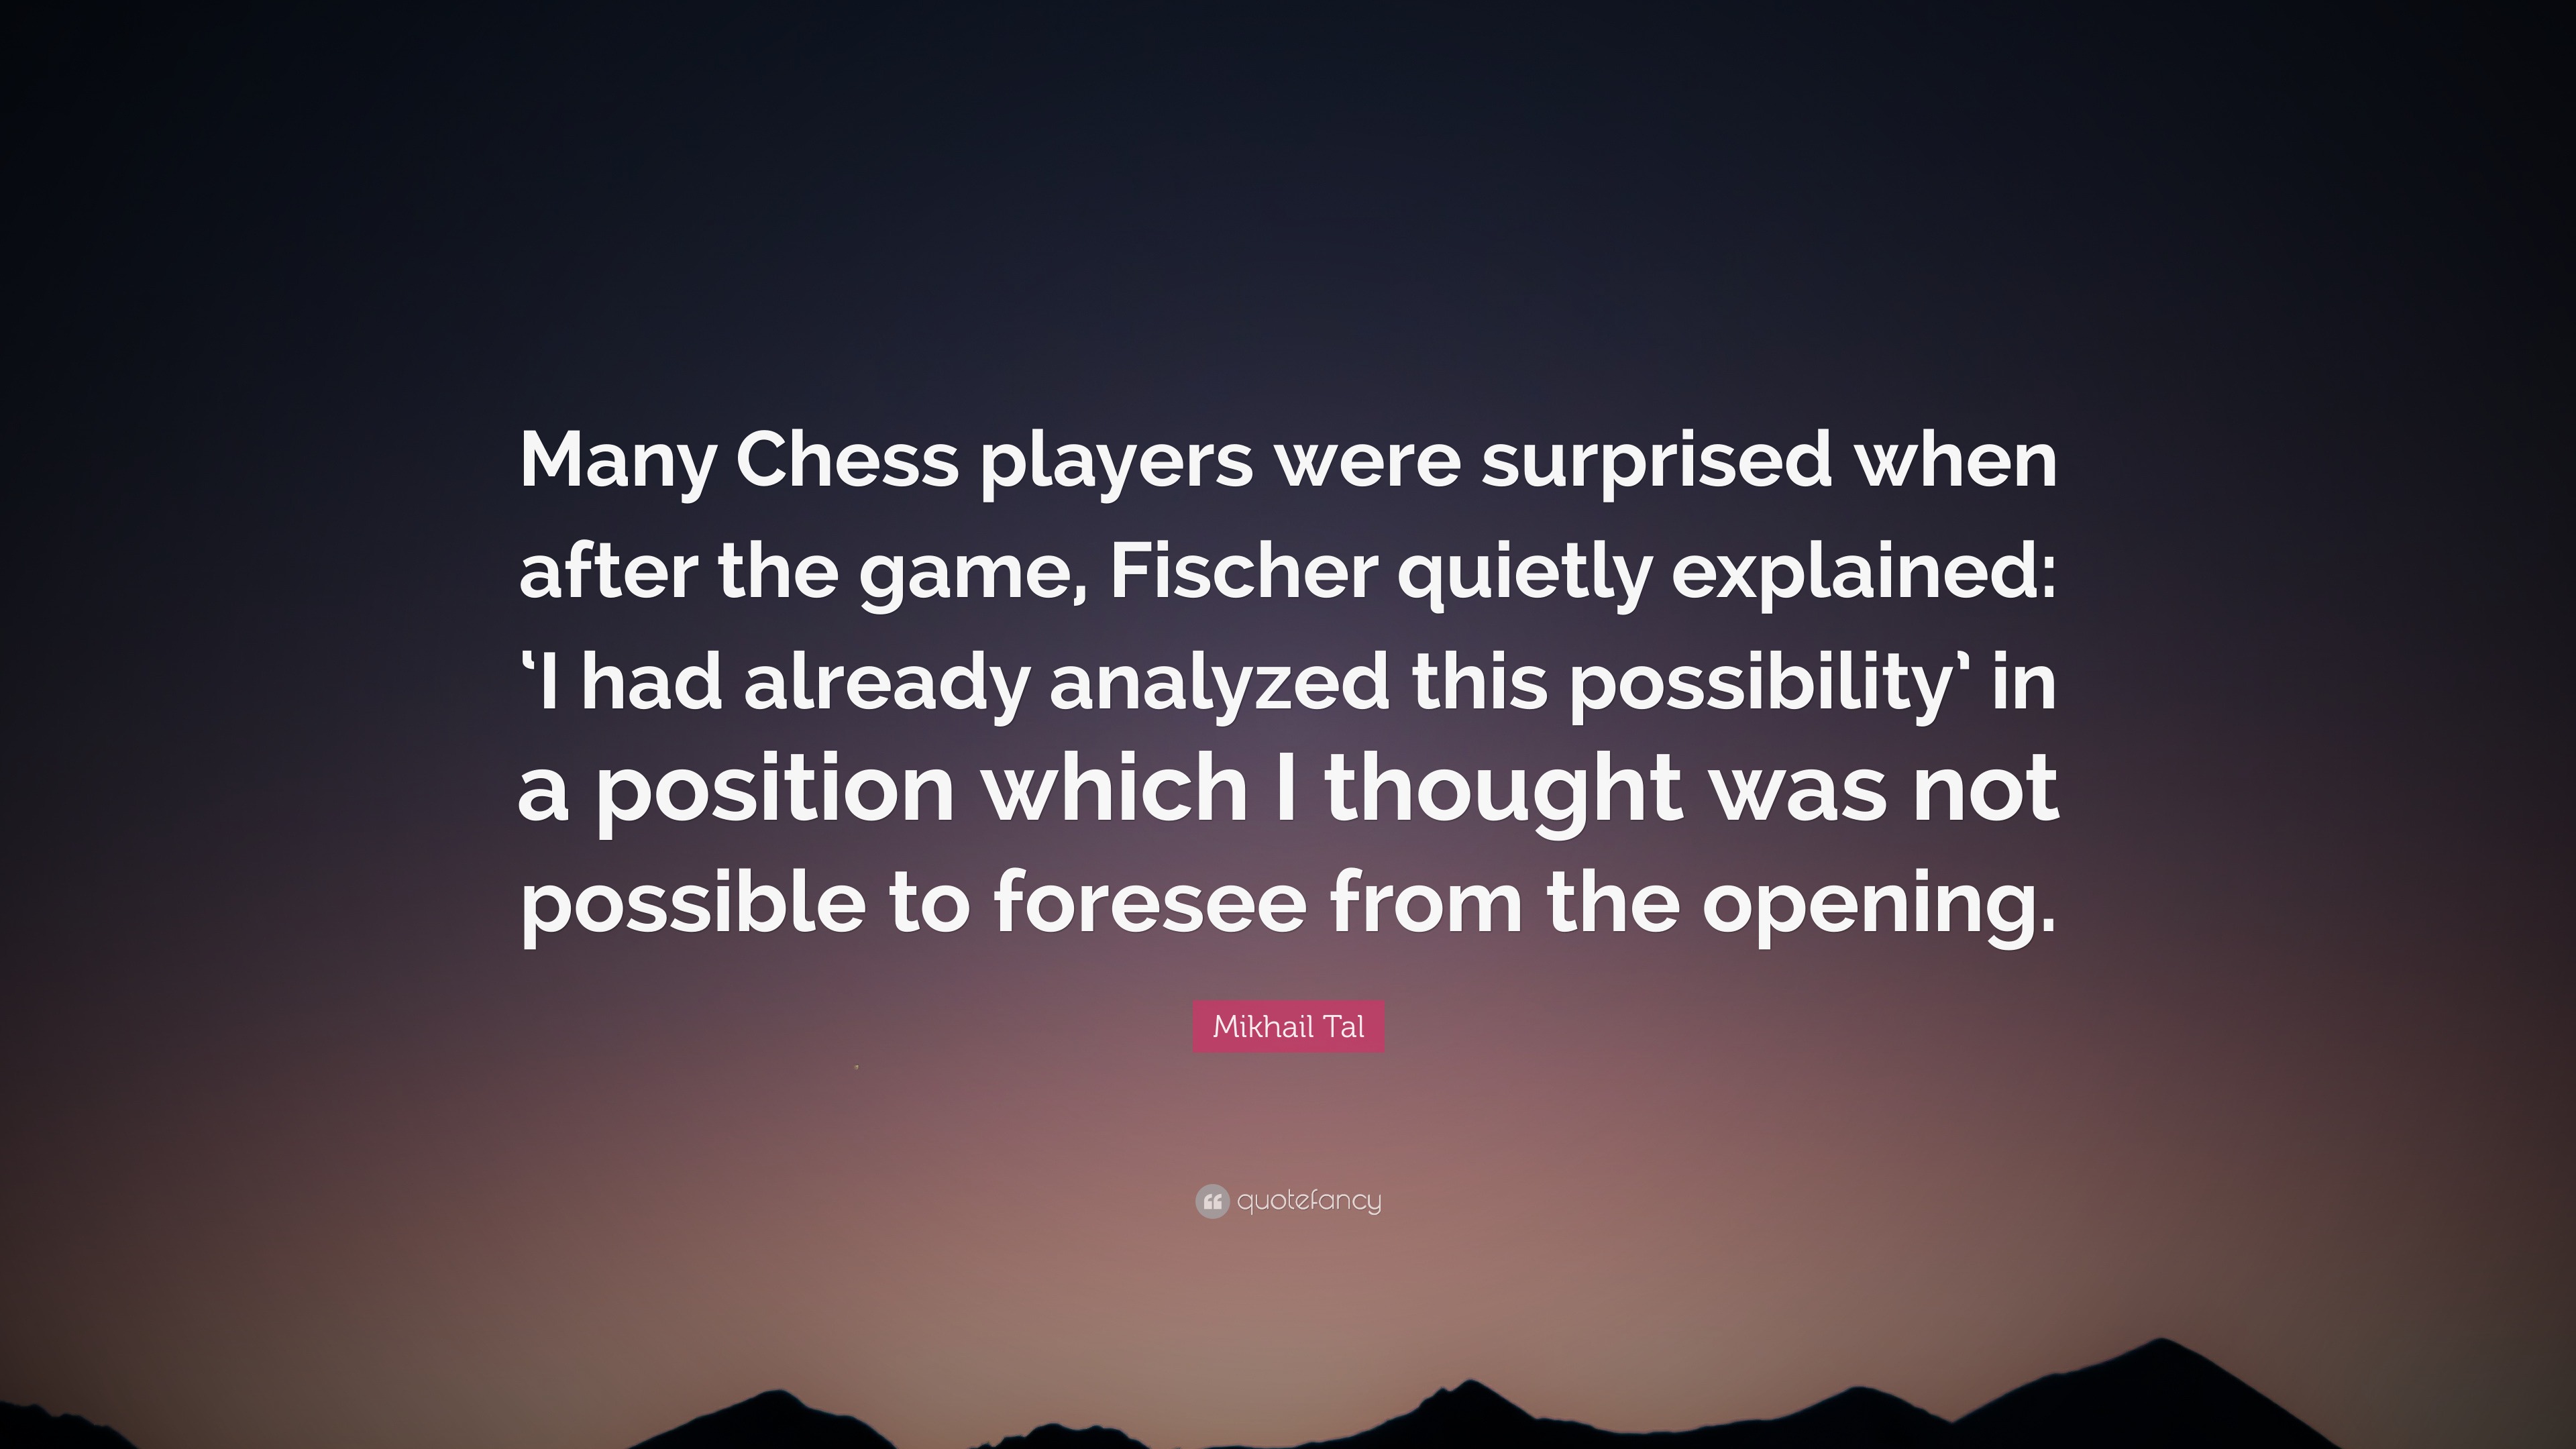 TheChessWorld.com - Chess Quote by Mikhail Tal!